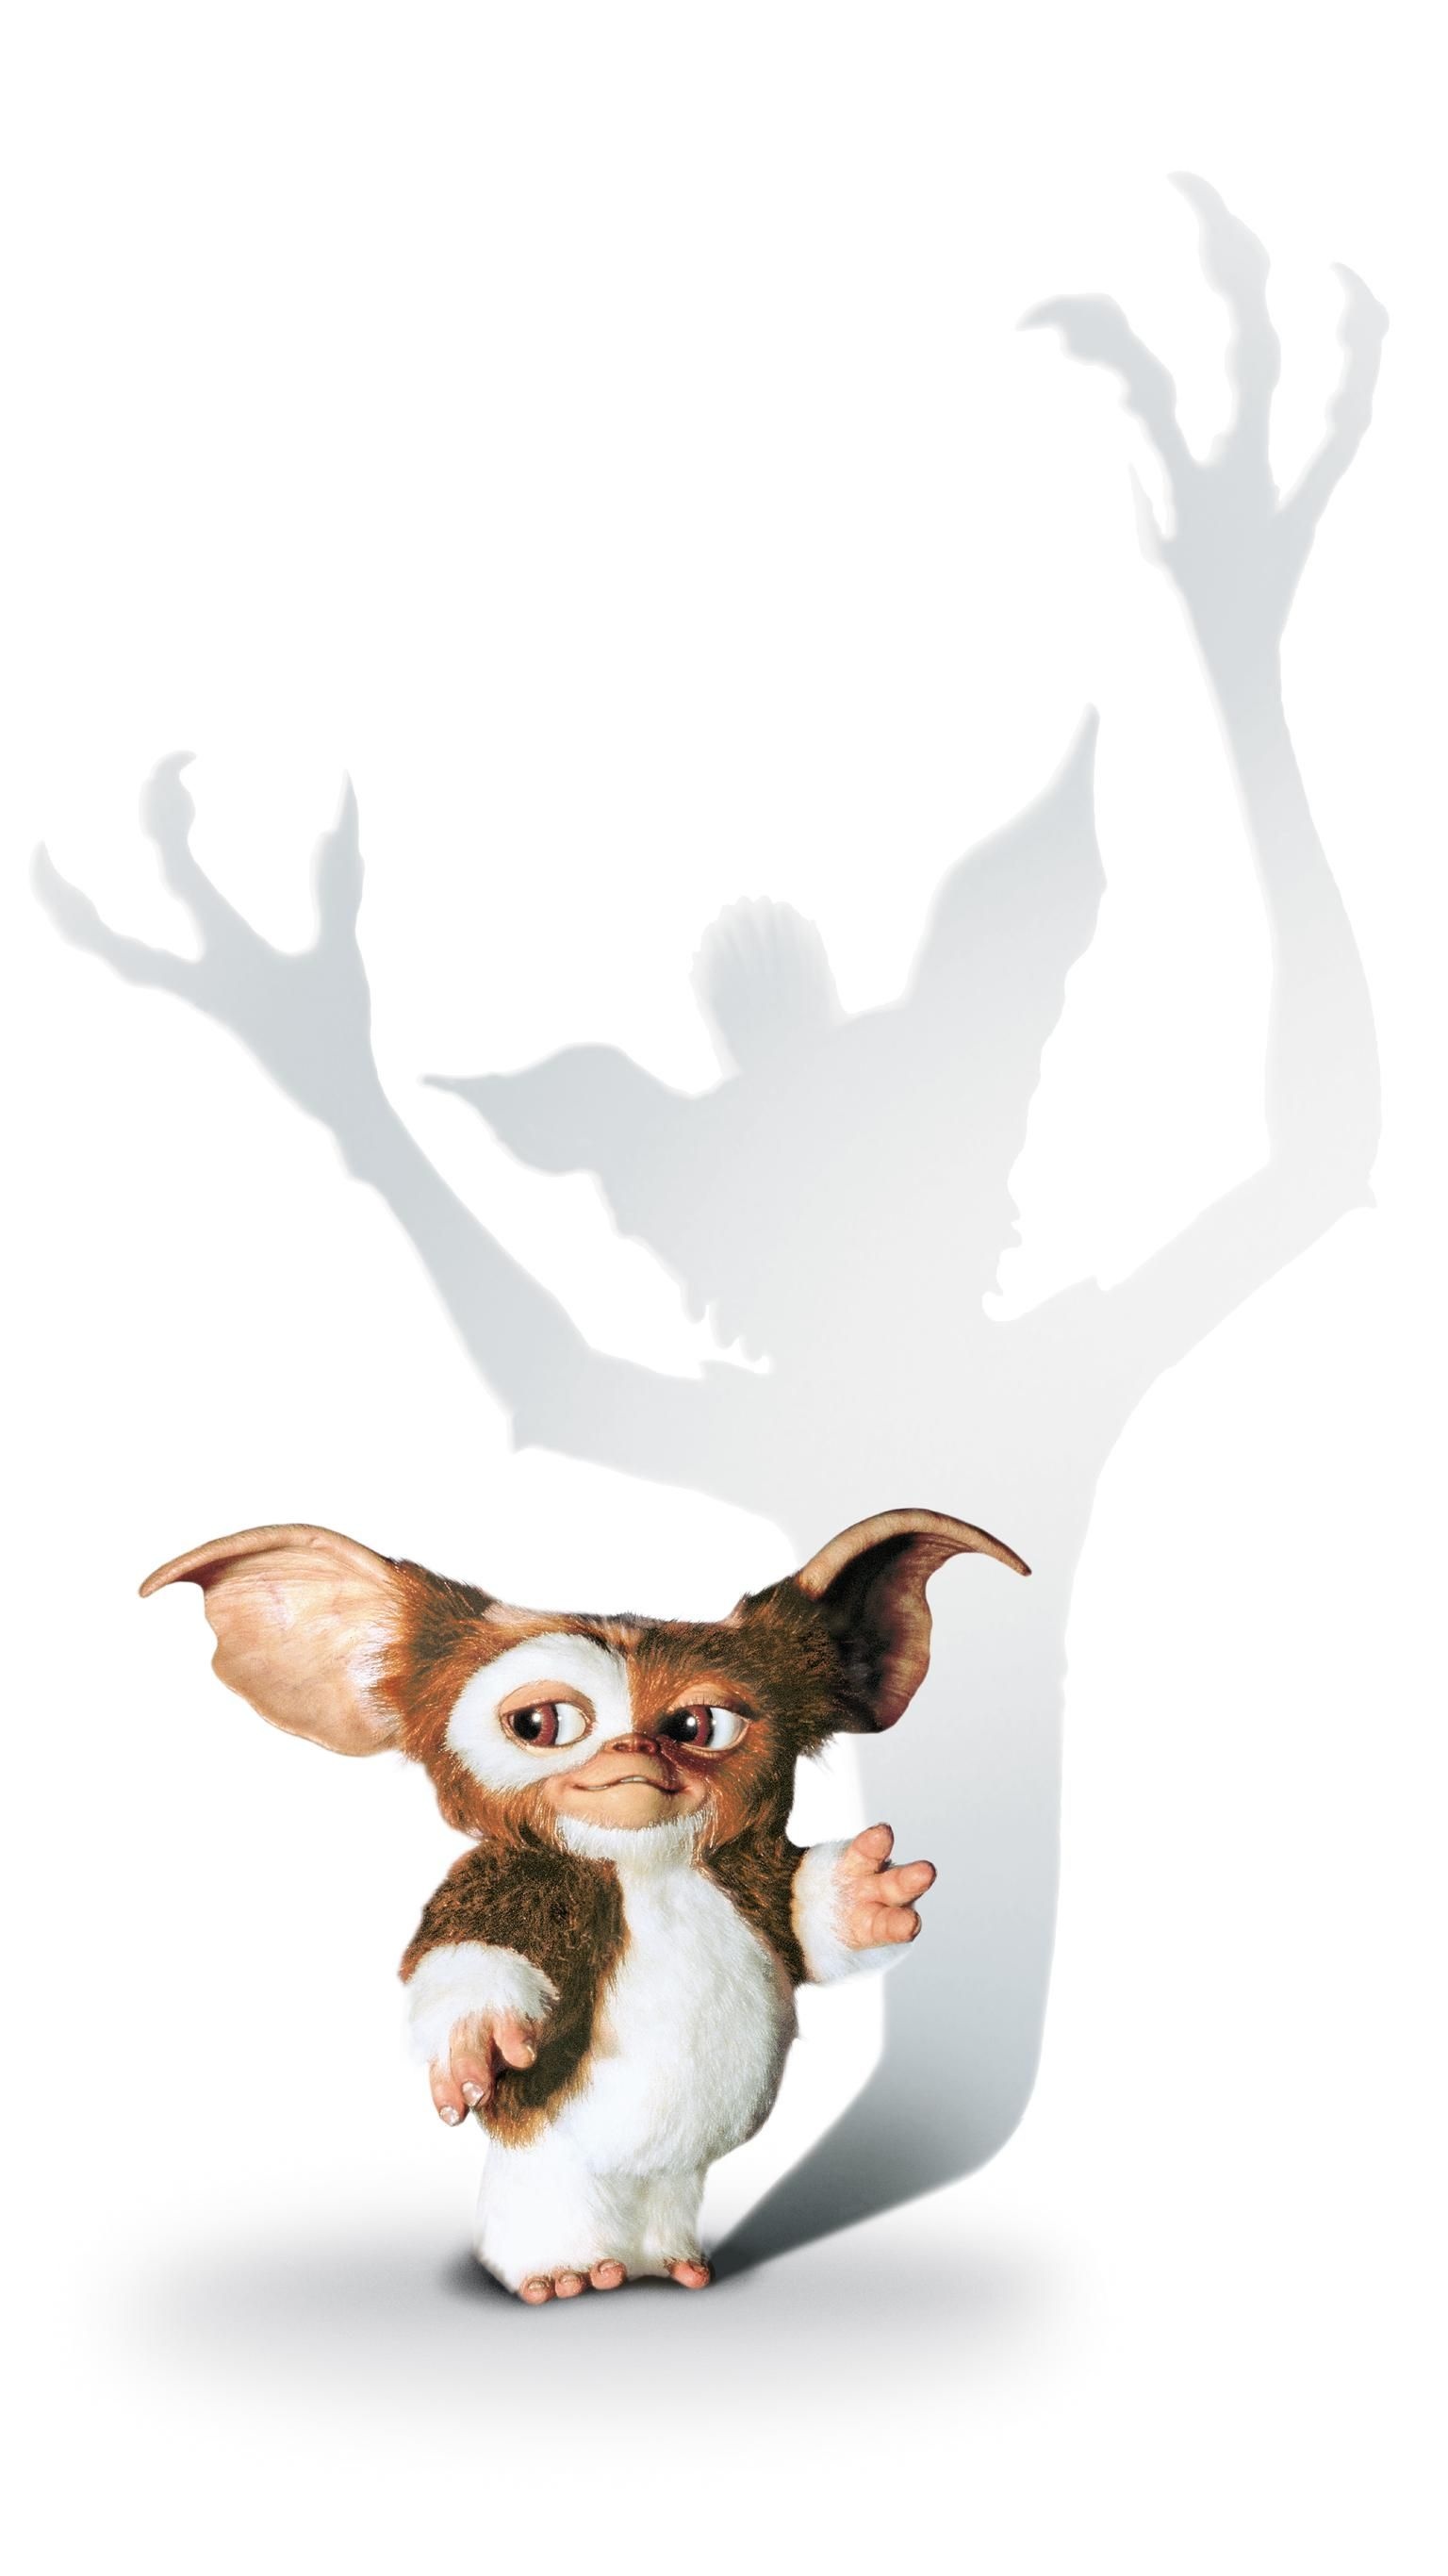 Gremlin: The center of large merchandising campaigns and opts for black comedy, An American film. 1540x2740 HD Wallpaper.